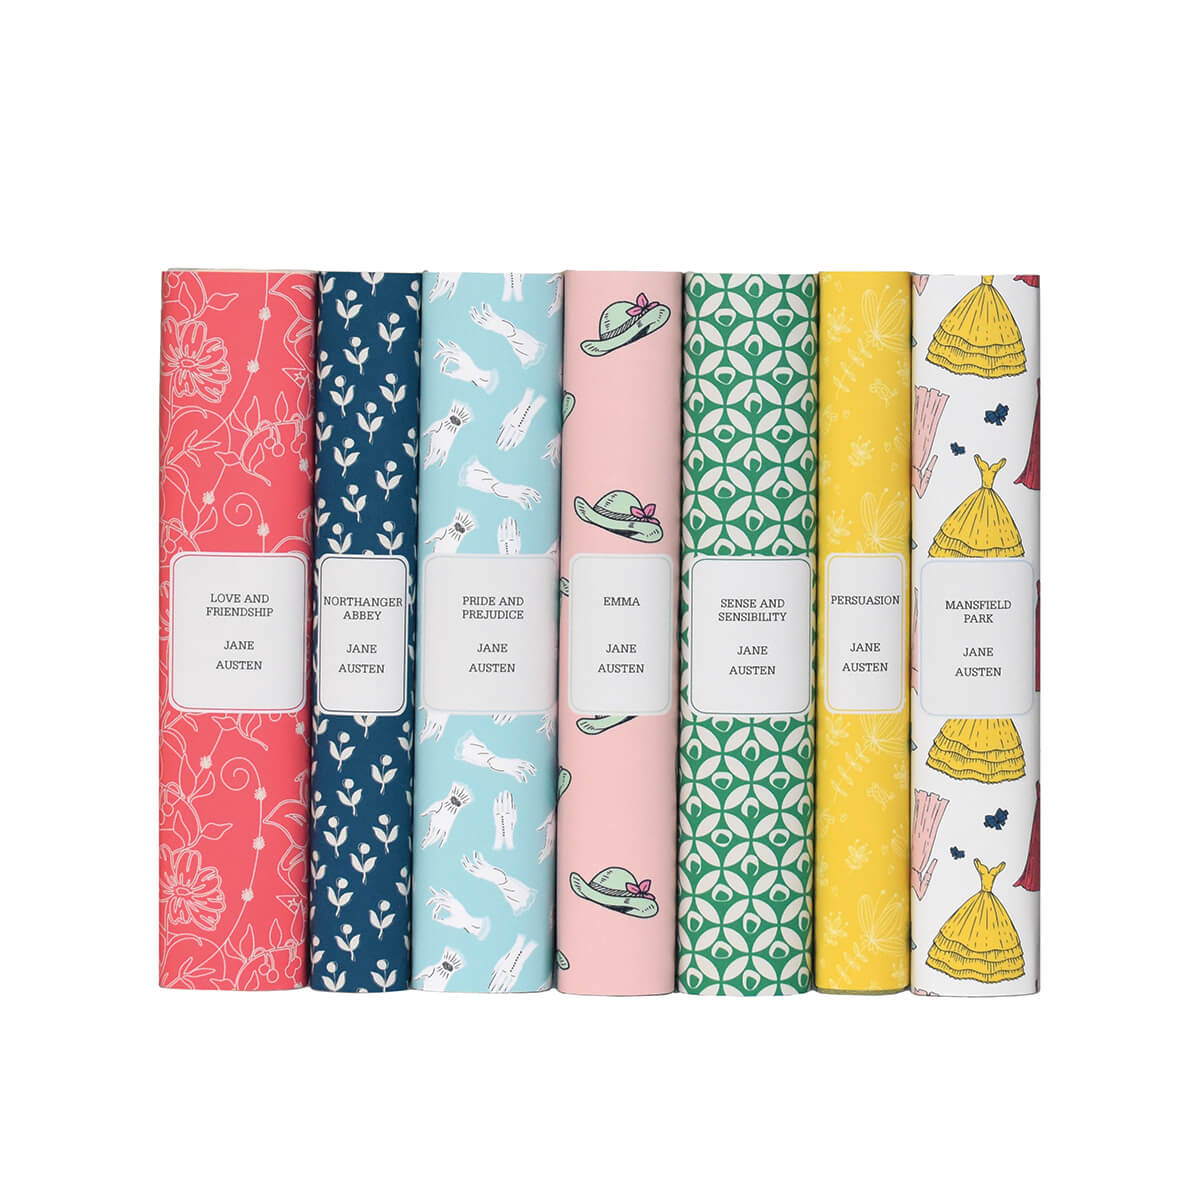 Featuring seven Penguin Classics hardcovers wrapped in charming custom-printed Juniper Books jackets, each with its own pastel pattern, this set offers a beautiful addition to any library or collection. 